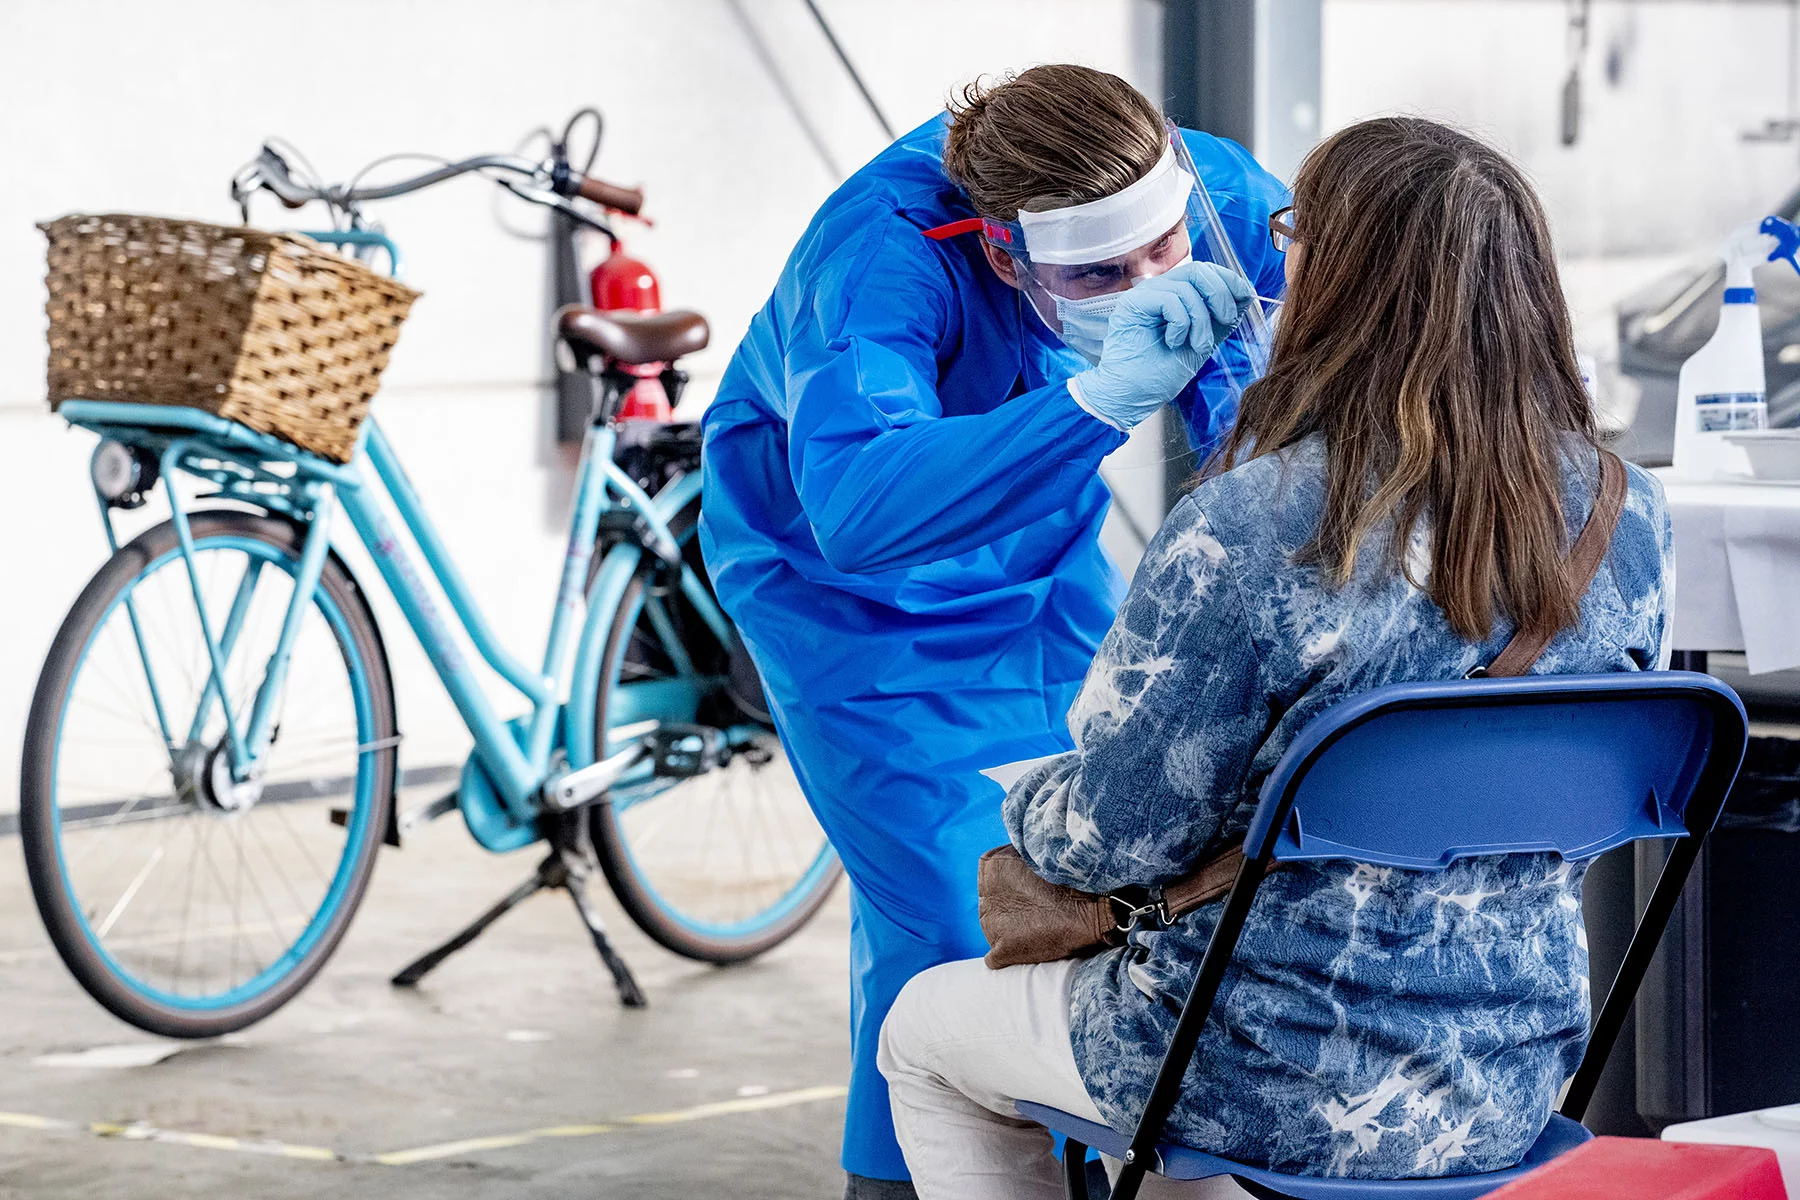 Medical professional with face mask using a COVID swap on a person sitting in front of them. In the background is a blue bike with a basket.